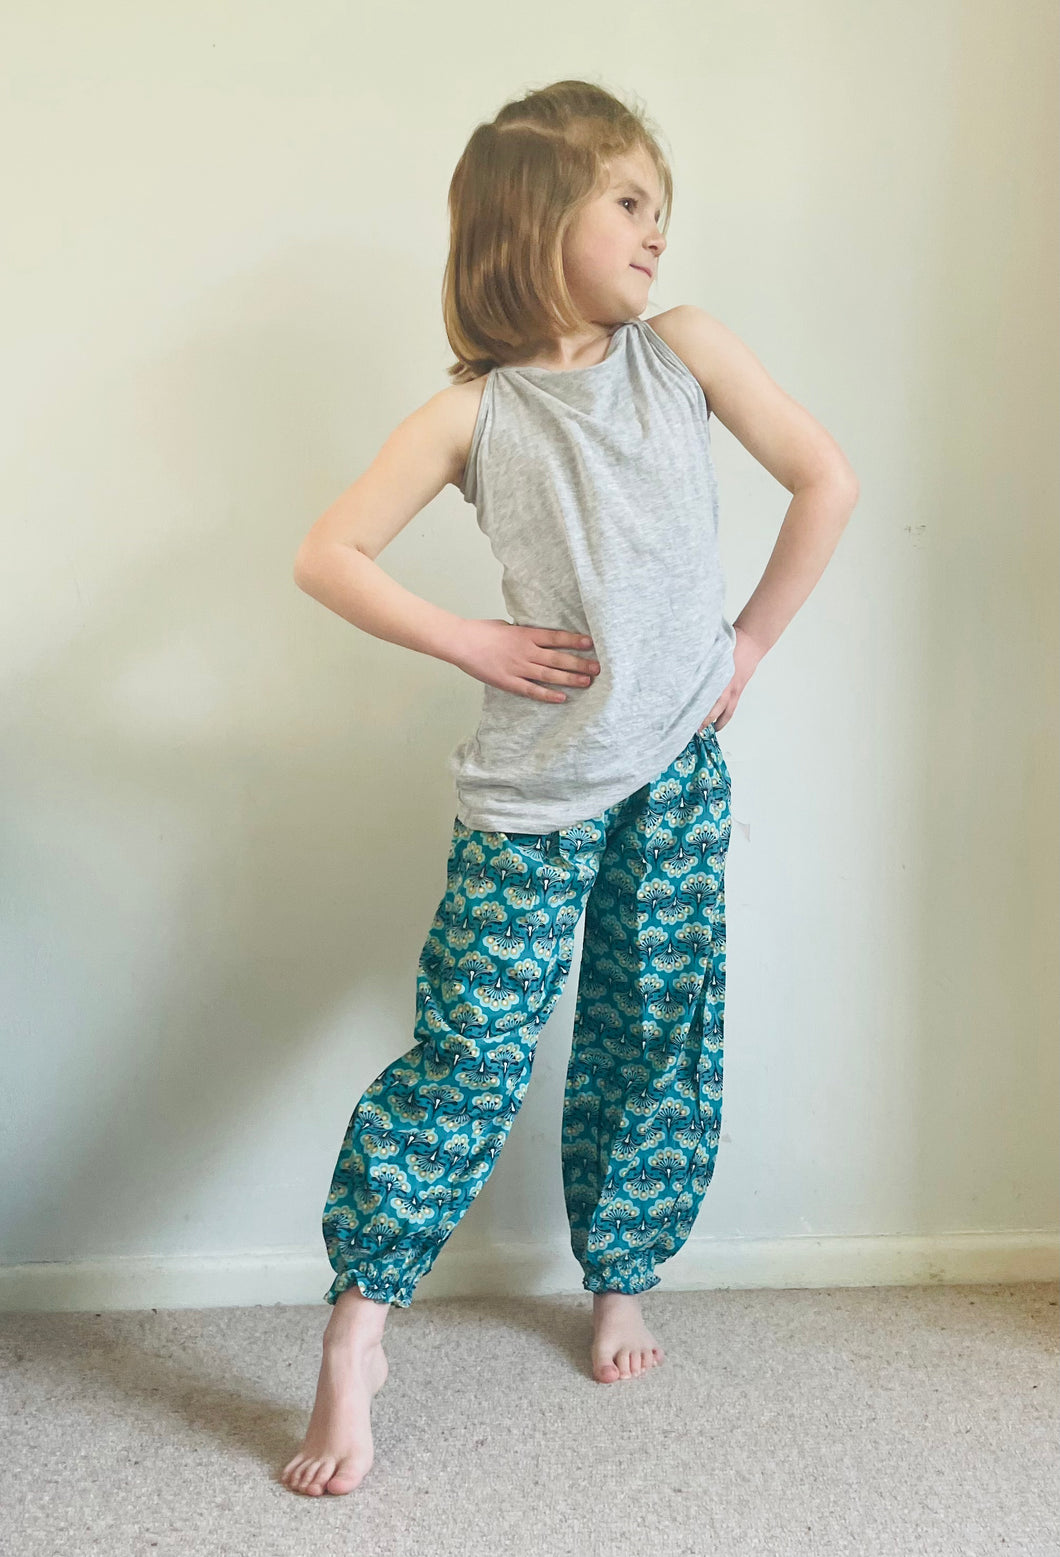 Emma's Emporium peacock print cotton colourful children's unisex comfy loose fit harem genie Alibaba afghani trousers for ages 1 year to 10 years, for toddlers and young children. Emma's Emporium online slow ethical alternative festival fashion.